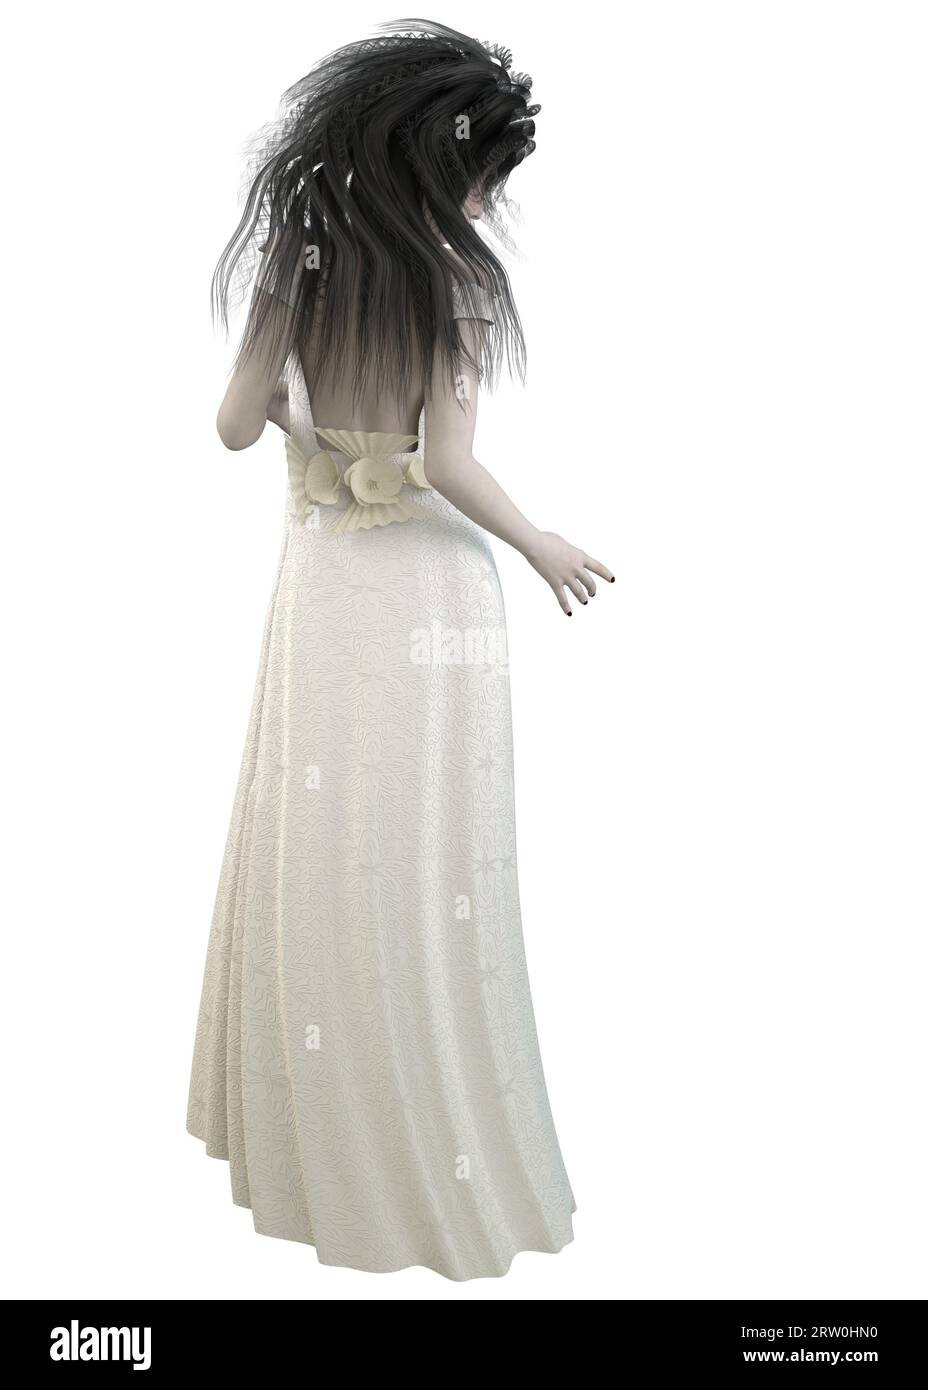 Gothic ghost woman with long black hair wears white gown, 3D Illustration. Stock Photo